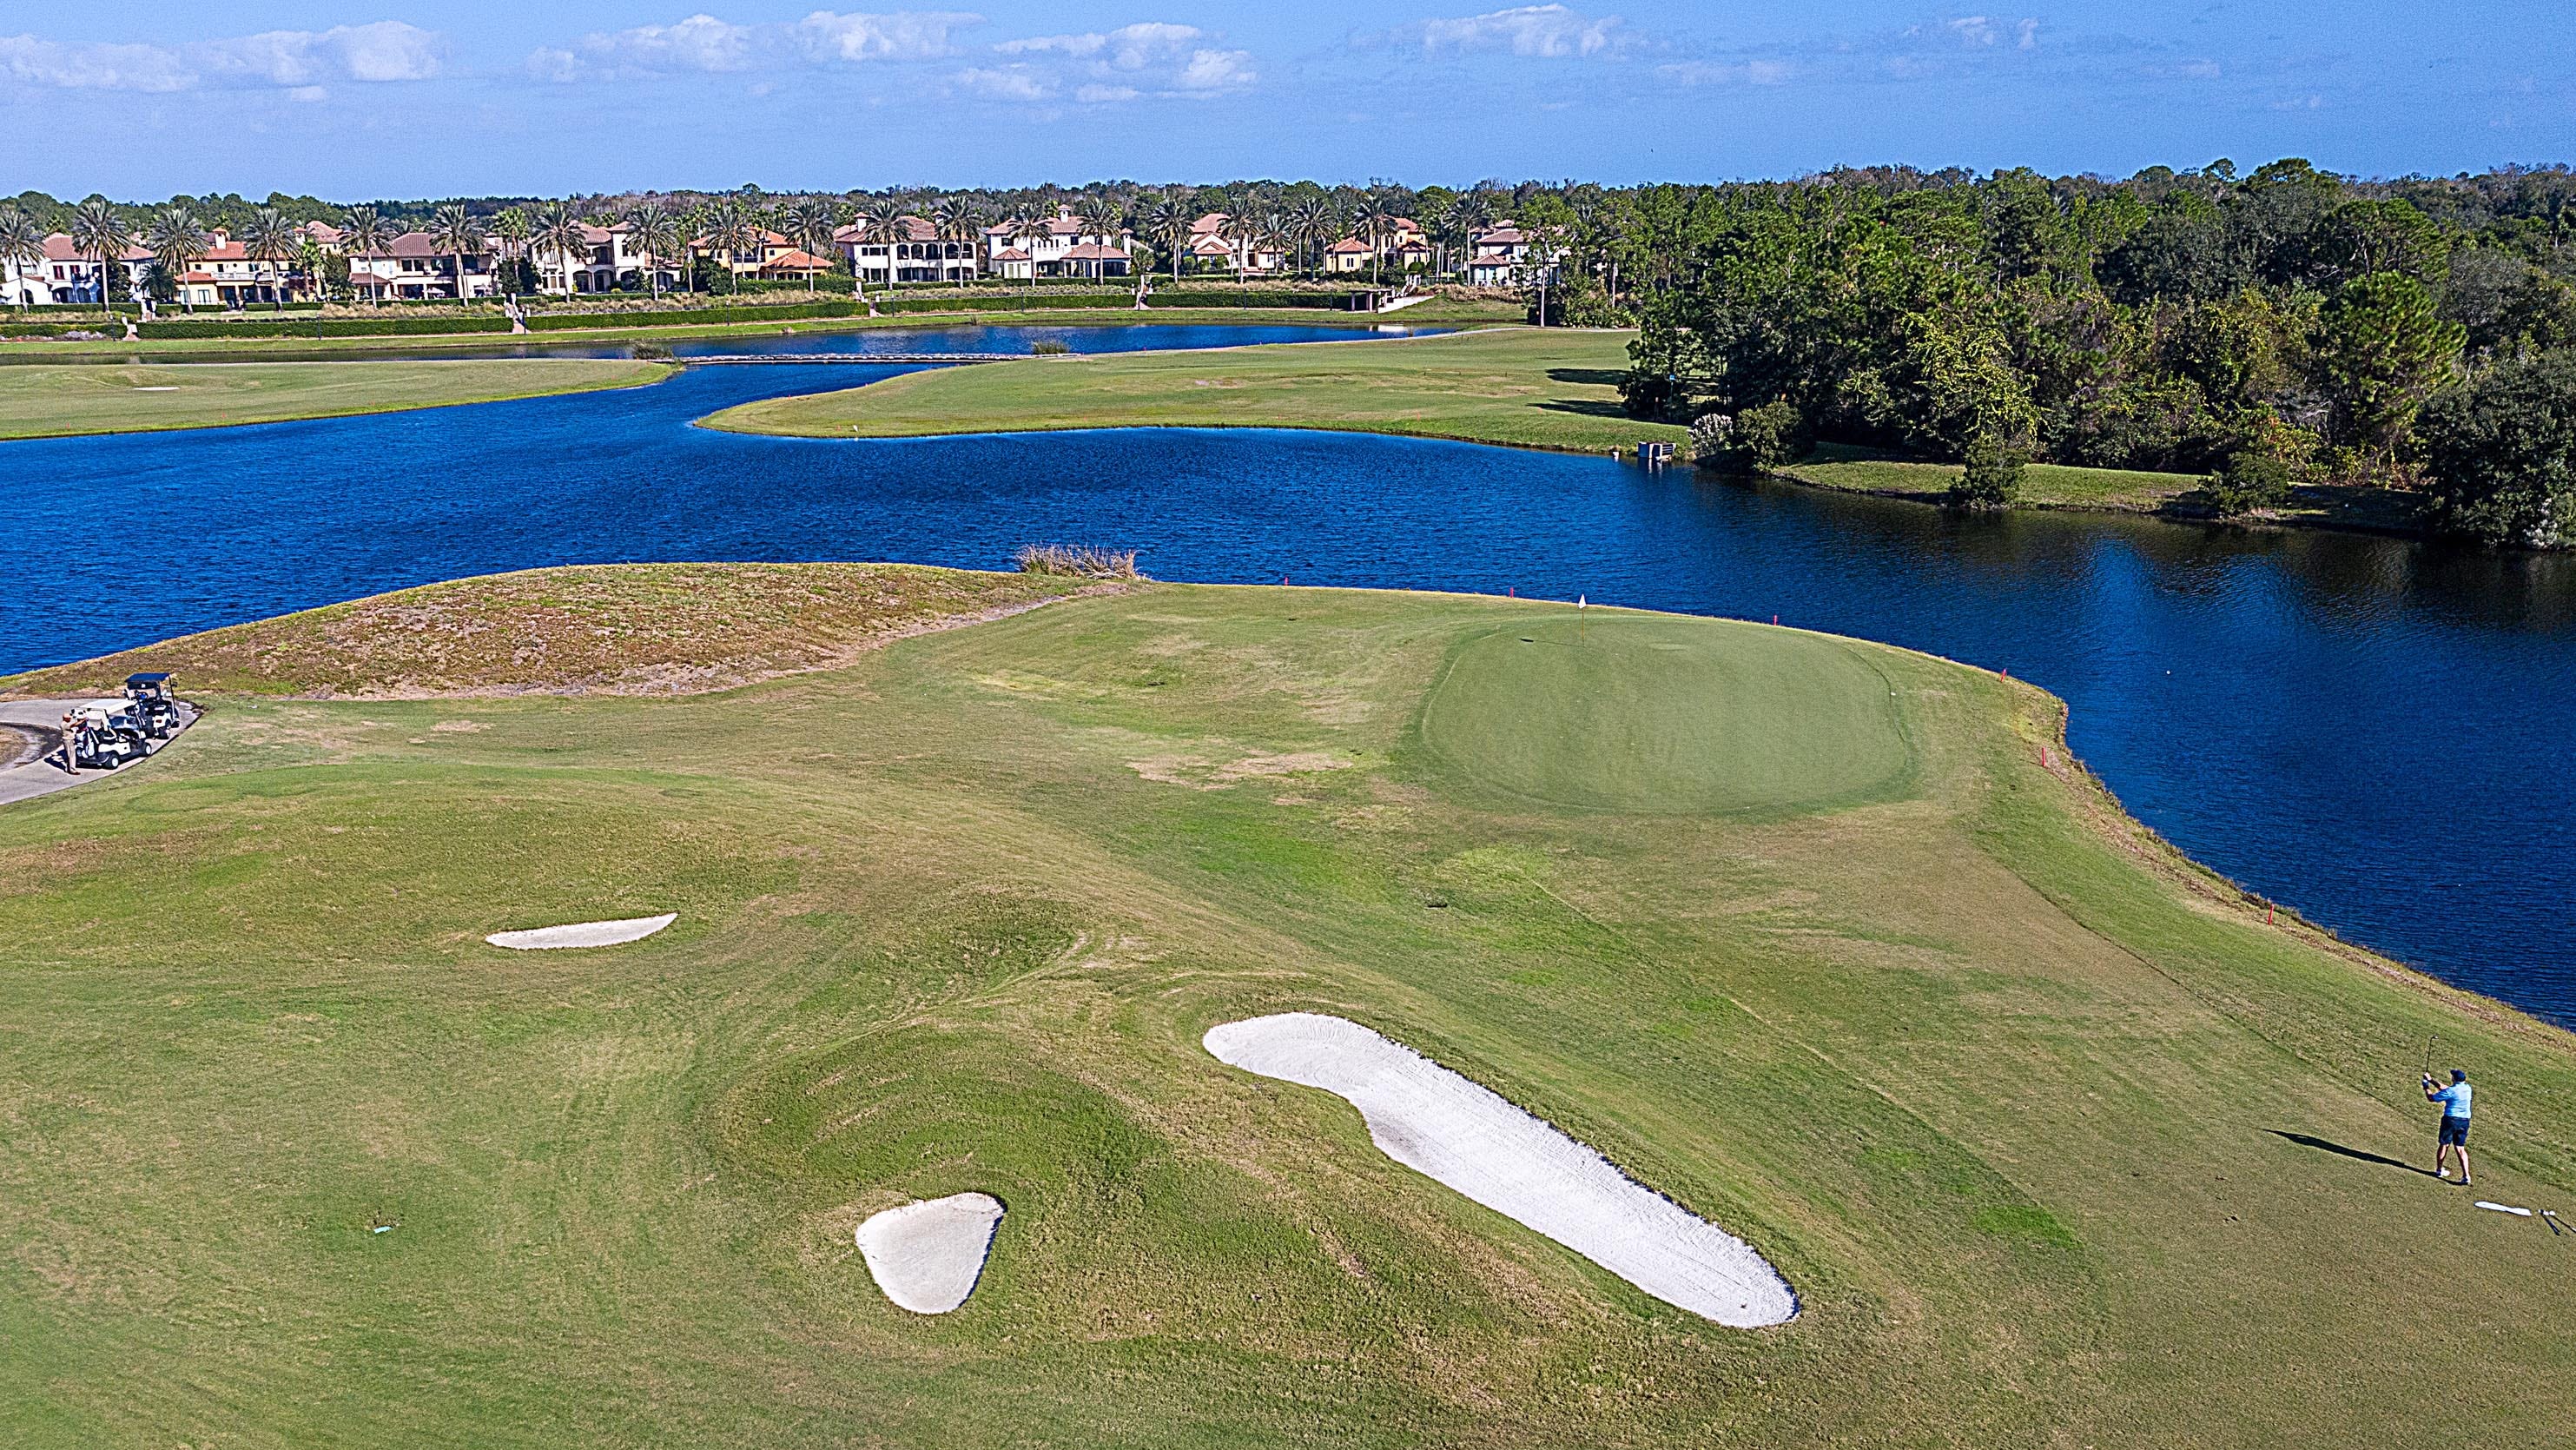 Golf courses part of water conservation efforts - St. Augustine Record